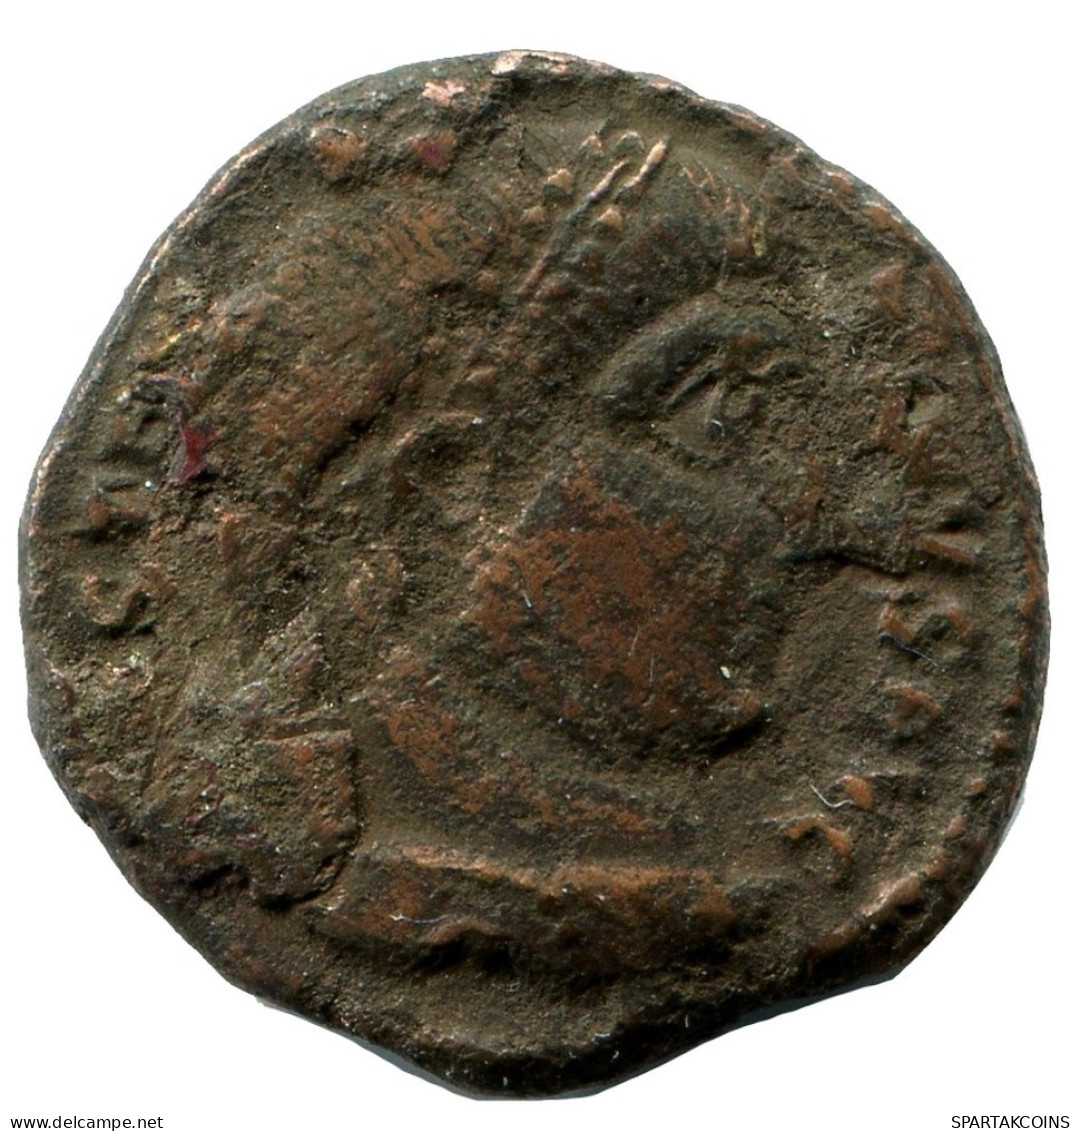 CONSTANTINE I MINTED IN HERACLEA FOUND IN IHNASYAH HOARD EGYPT #ANC11218.14.E.A - The Christian Empire (307 AD Tot 363 AD)